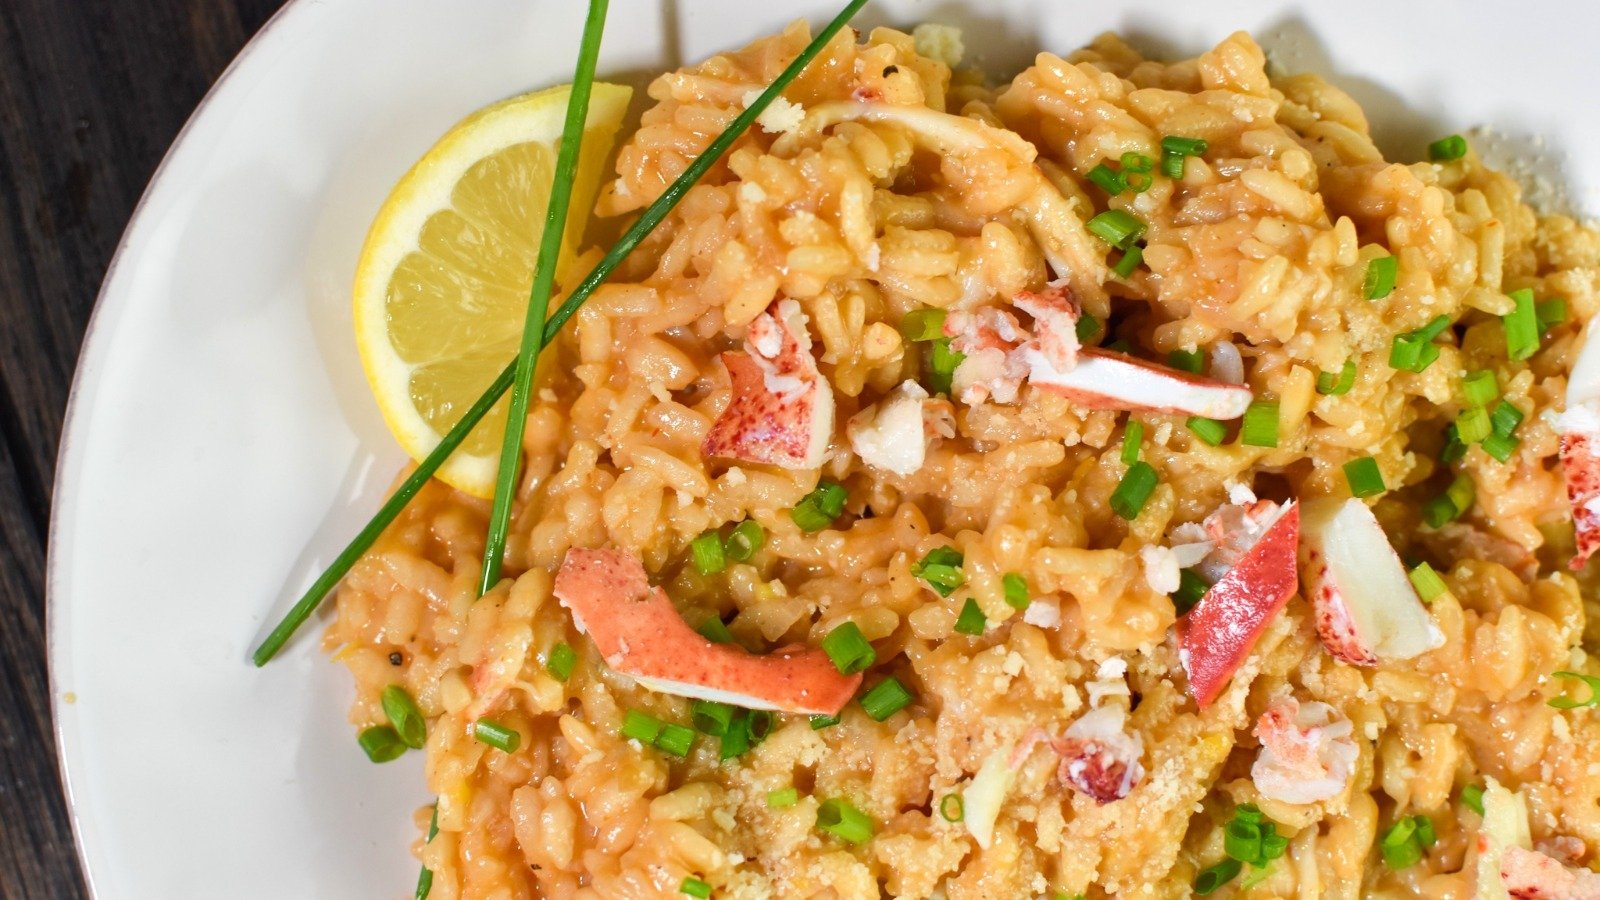 This Lobster Risotto Recipe Will Make You Drool